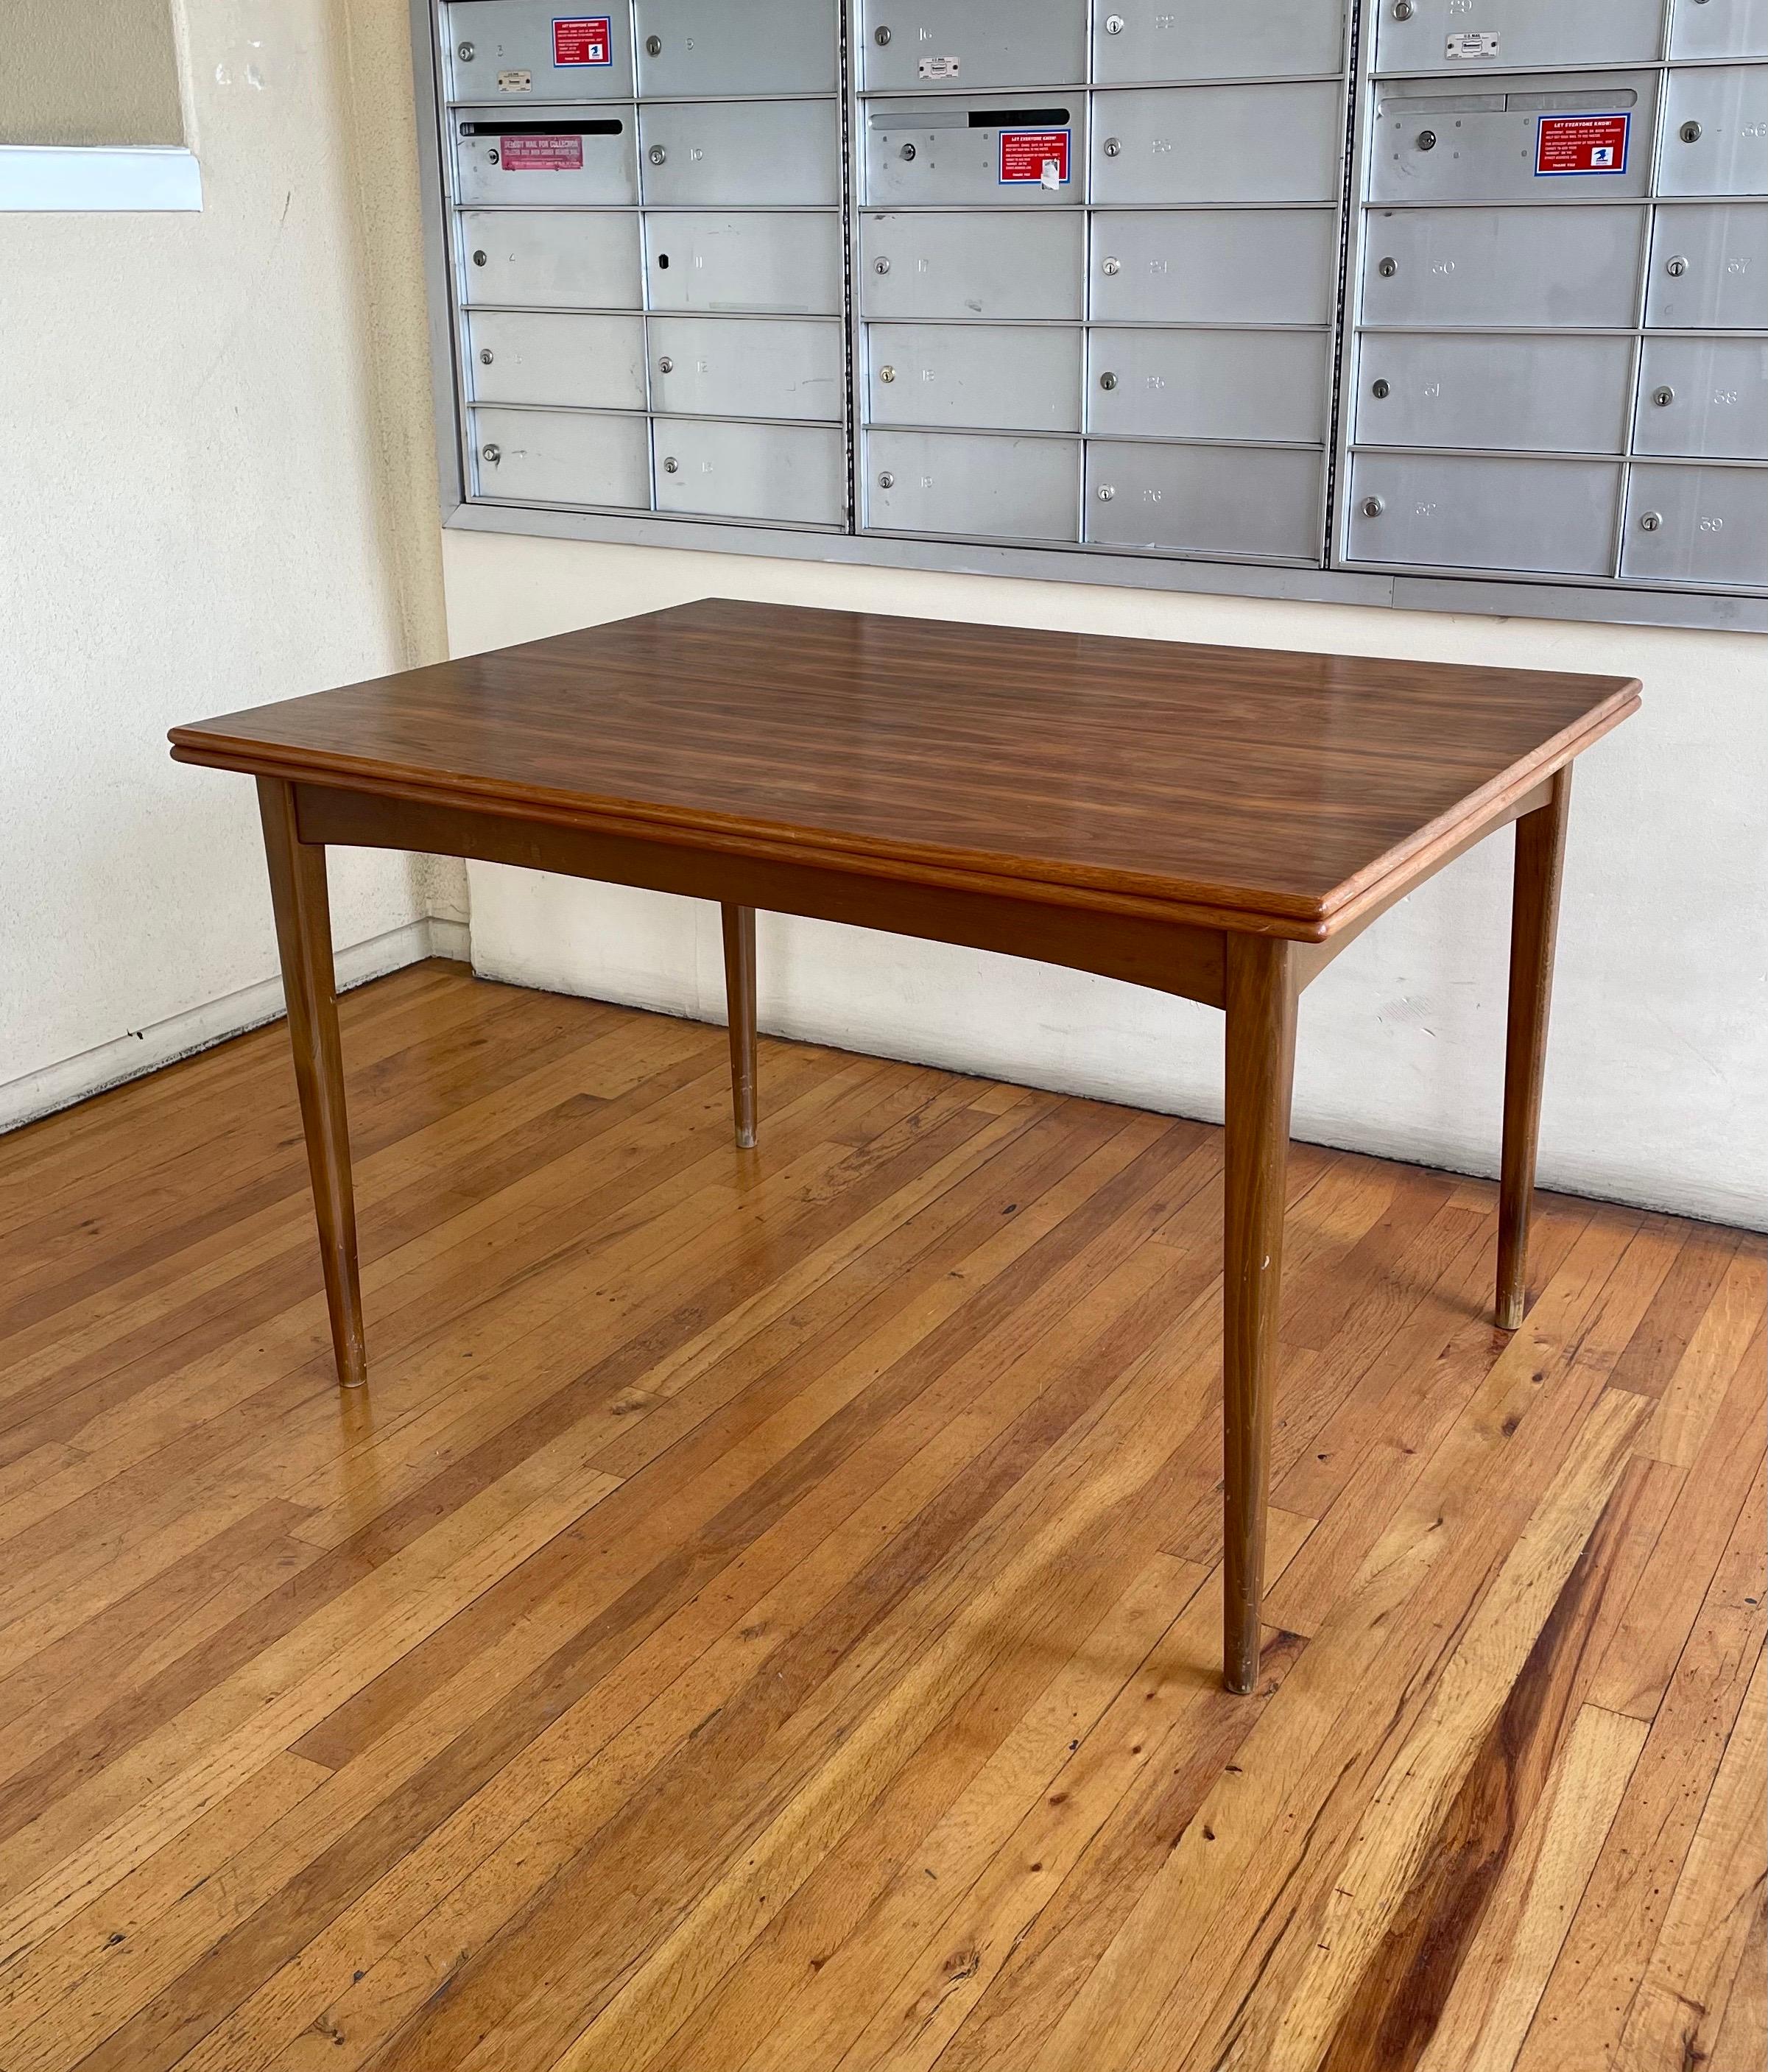 Walnut and beechwood dining table by Karl-Erik Ekselius Model-1401 expanding dining table for DUX, the top folds and swivels this table it's in its original condition we didn't refinish it because it's in very good condition when it's open its